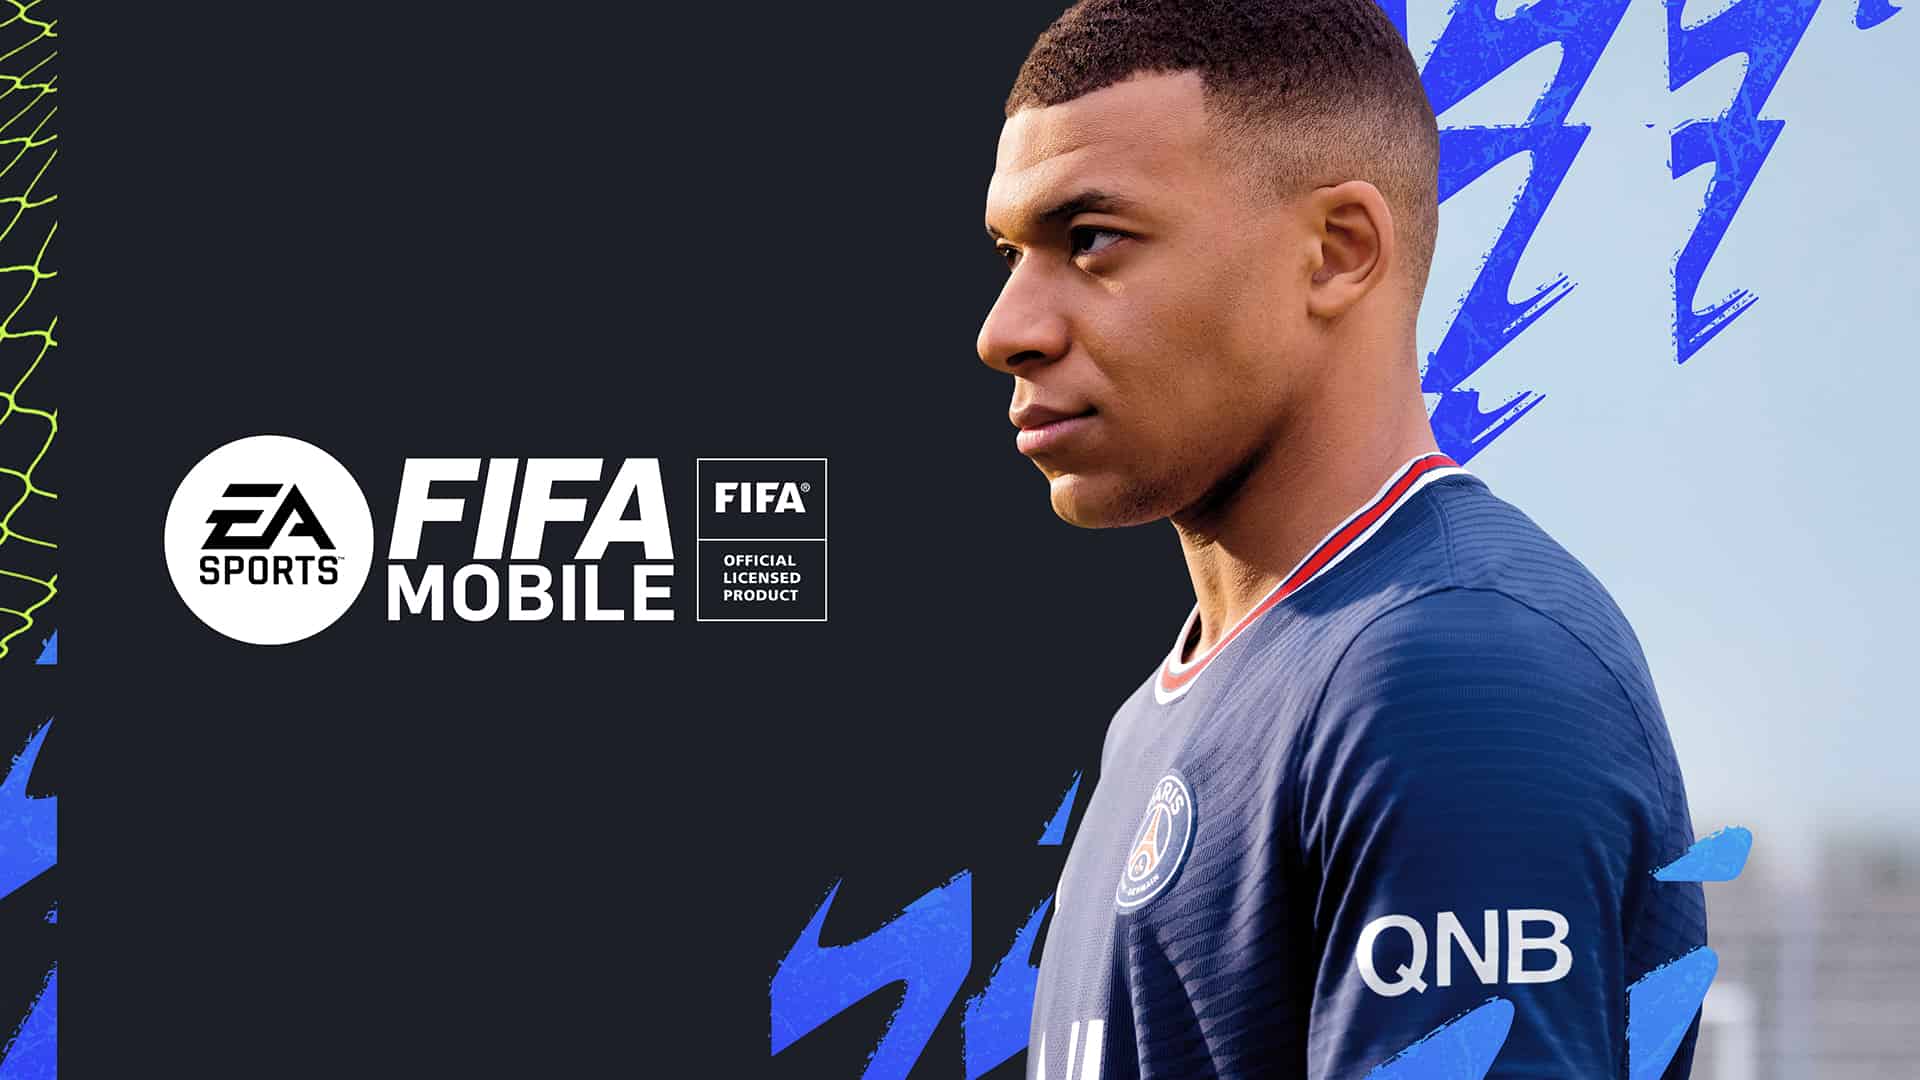 FIFA Mobile New Update 17.1.01 is now available Release Notes FifaUltimateTeam.it UK